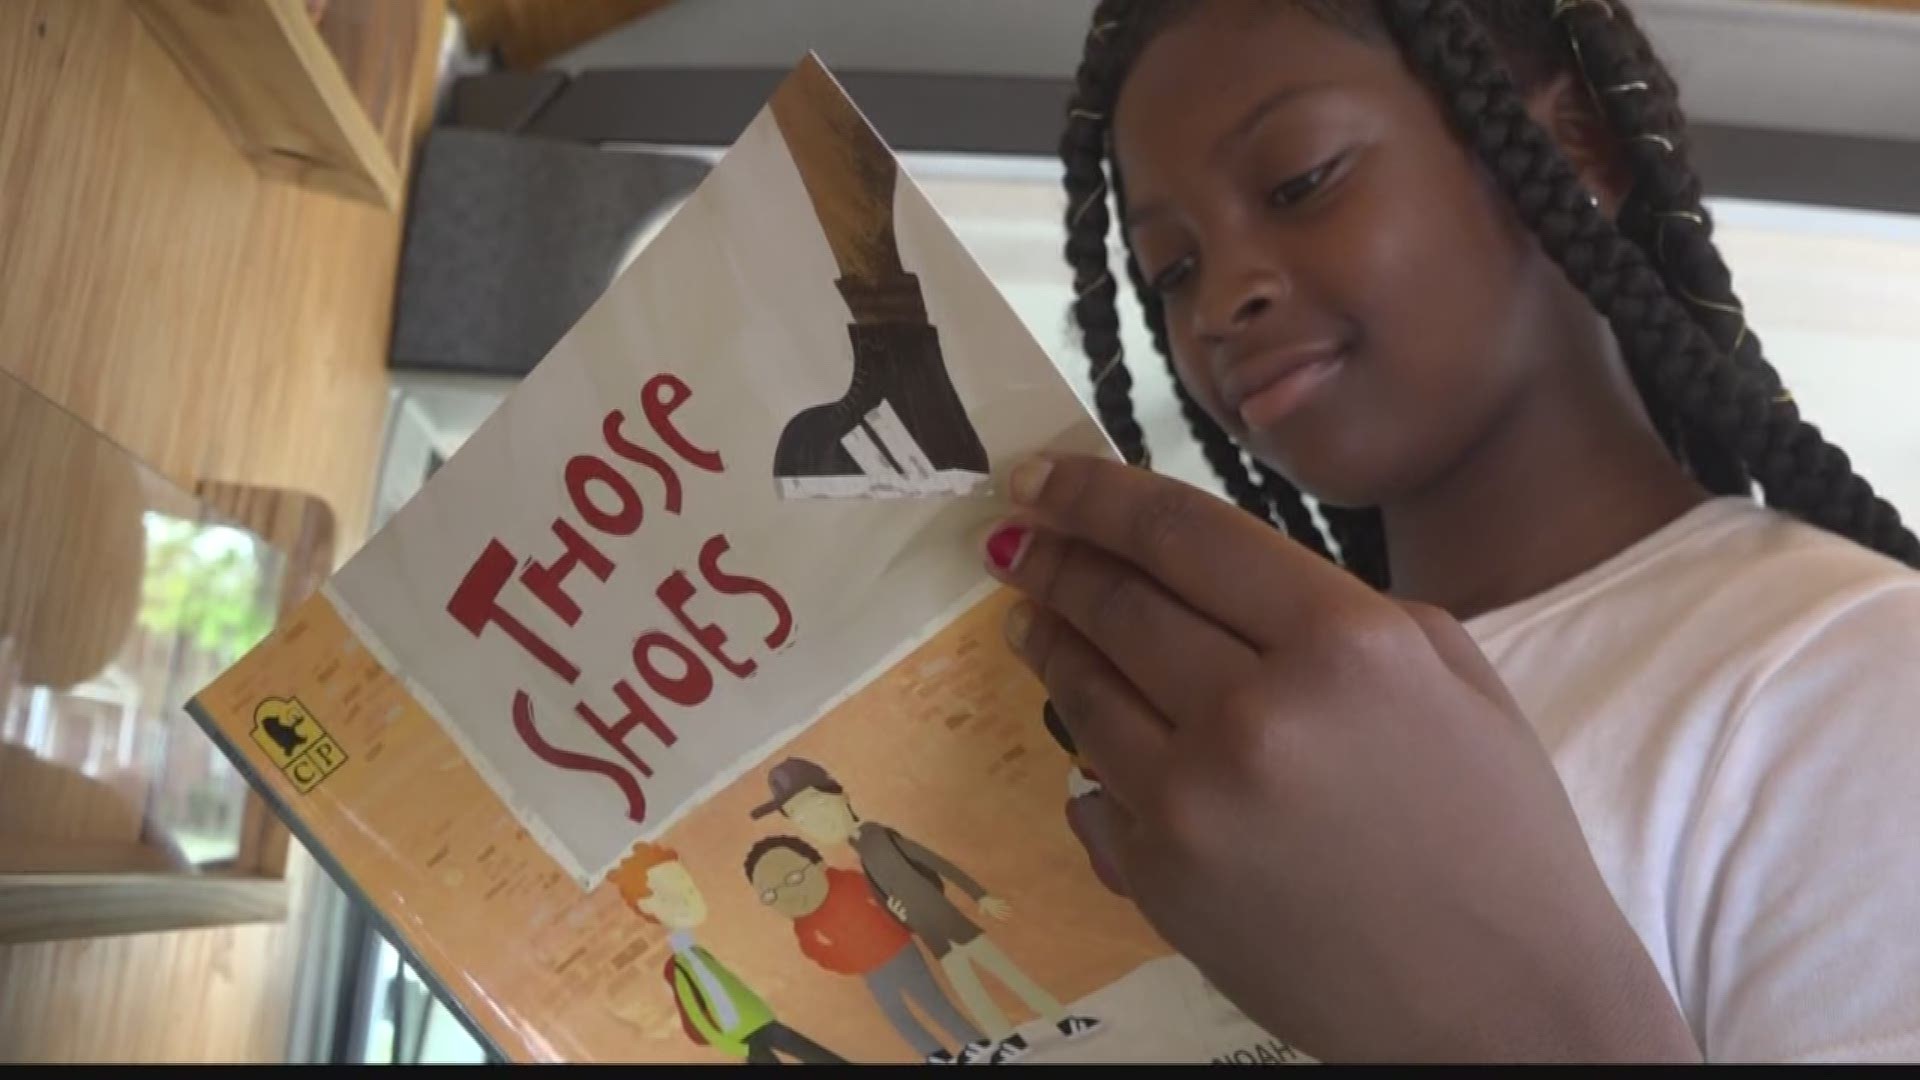 How do you get kids to develop a love for reading? One man in Webster Groves thinks the answer to that question is not an "out of the box" idea. 